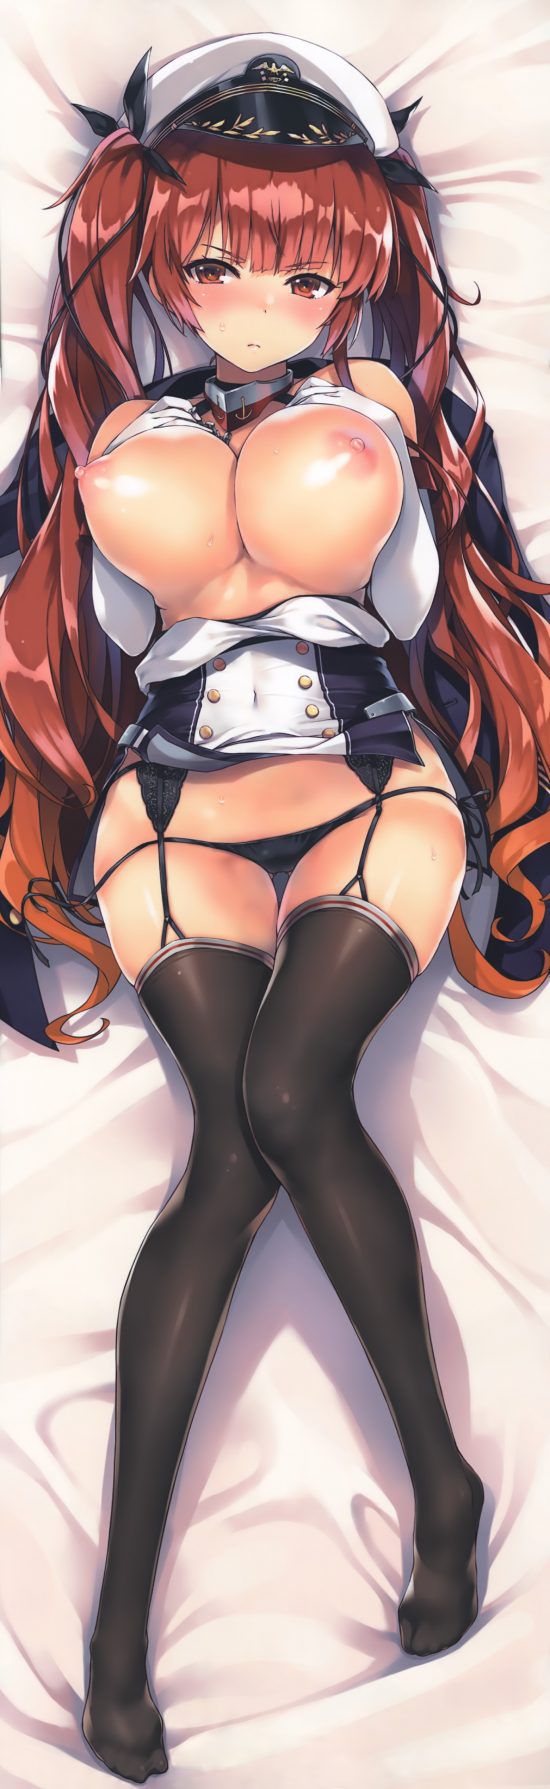 【Secondary erotic】Here is an erotic image of Honolulu appearing in Azur Lane 18